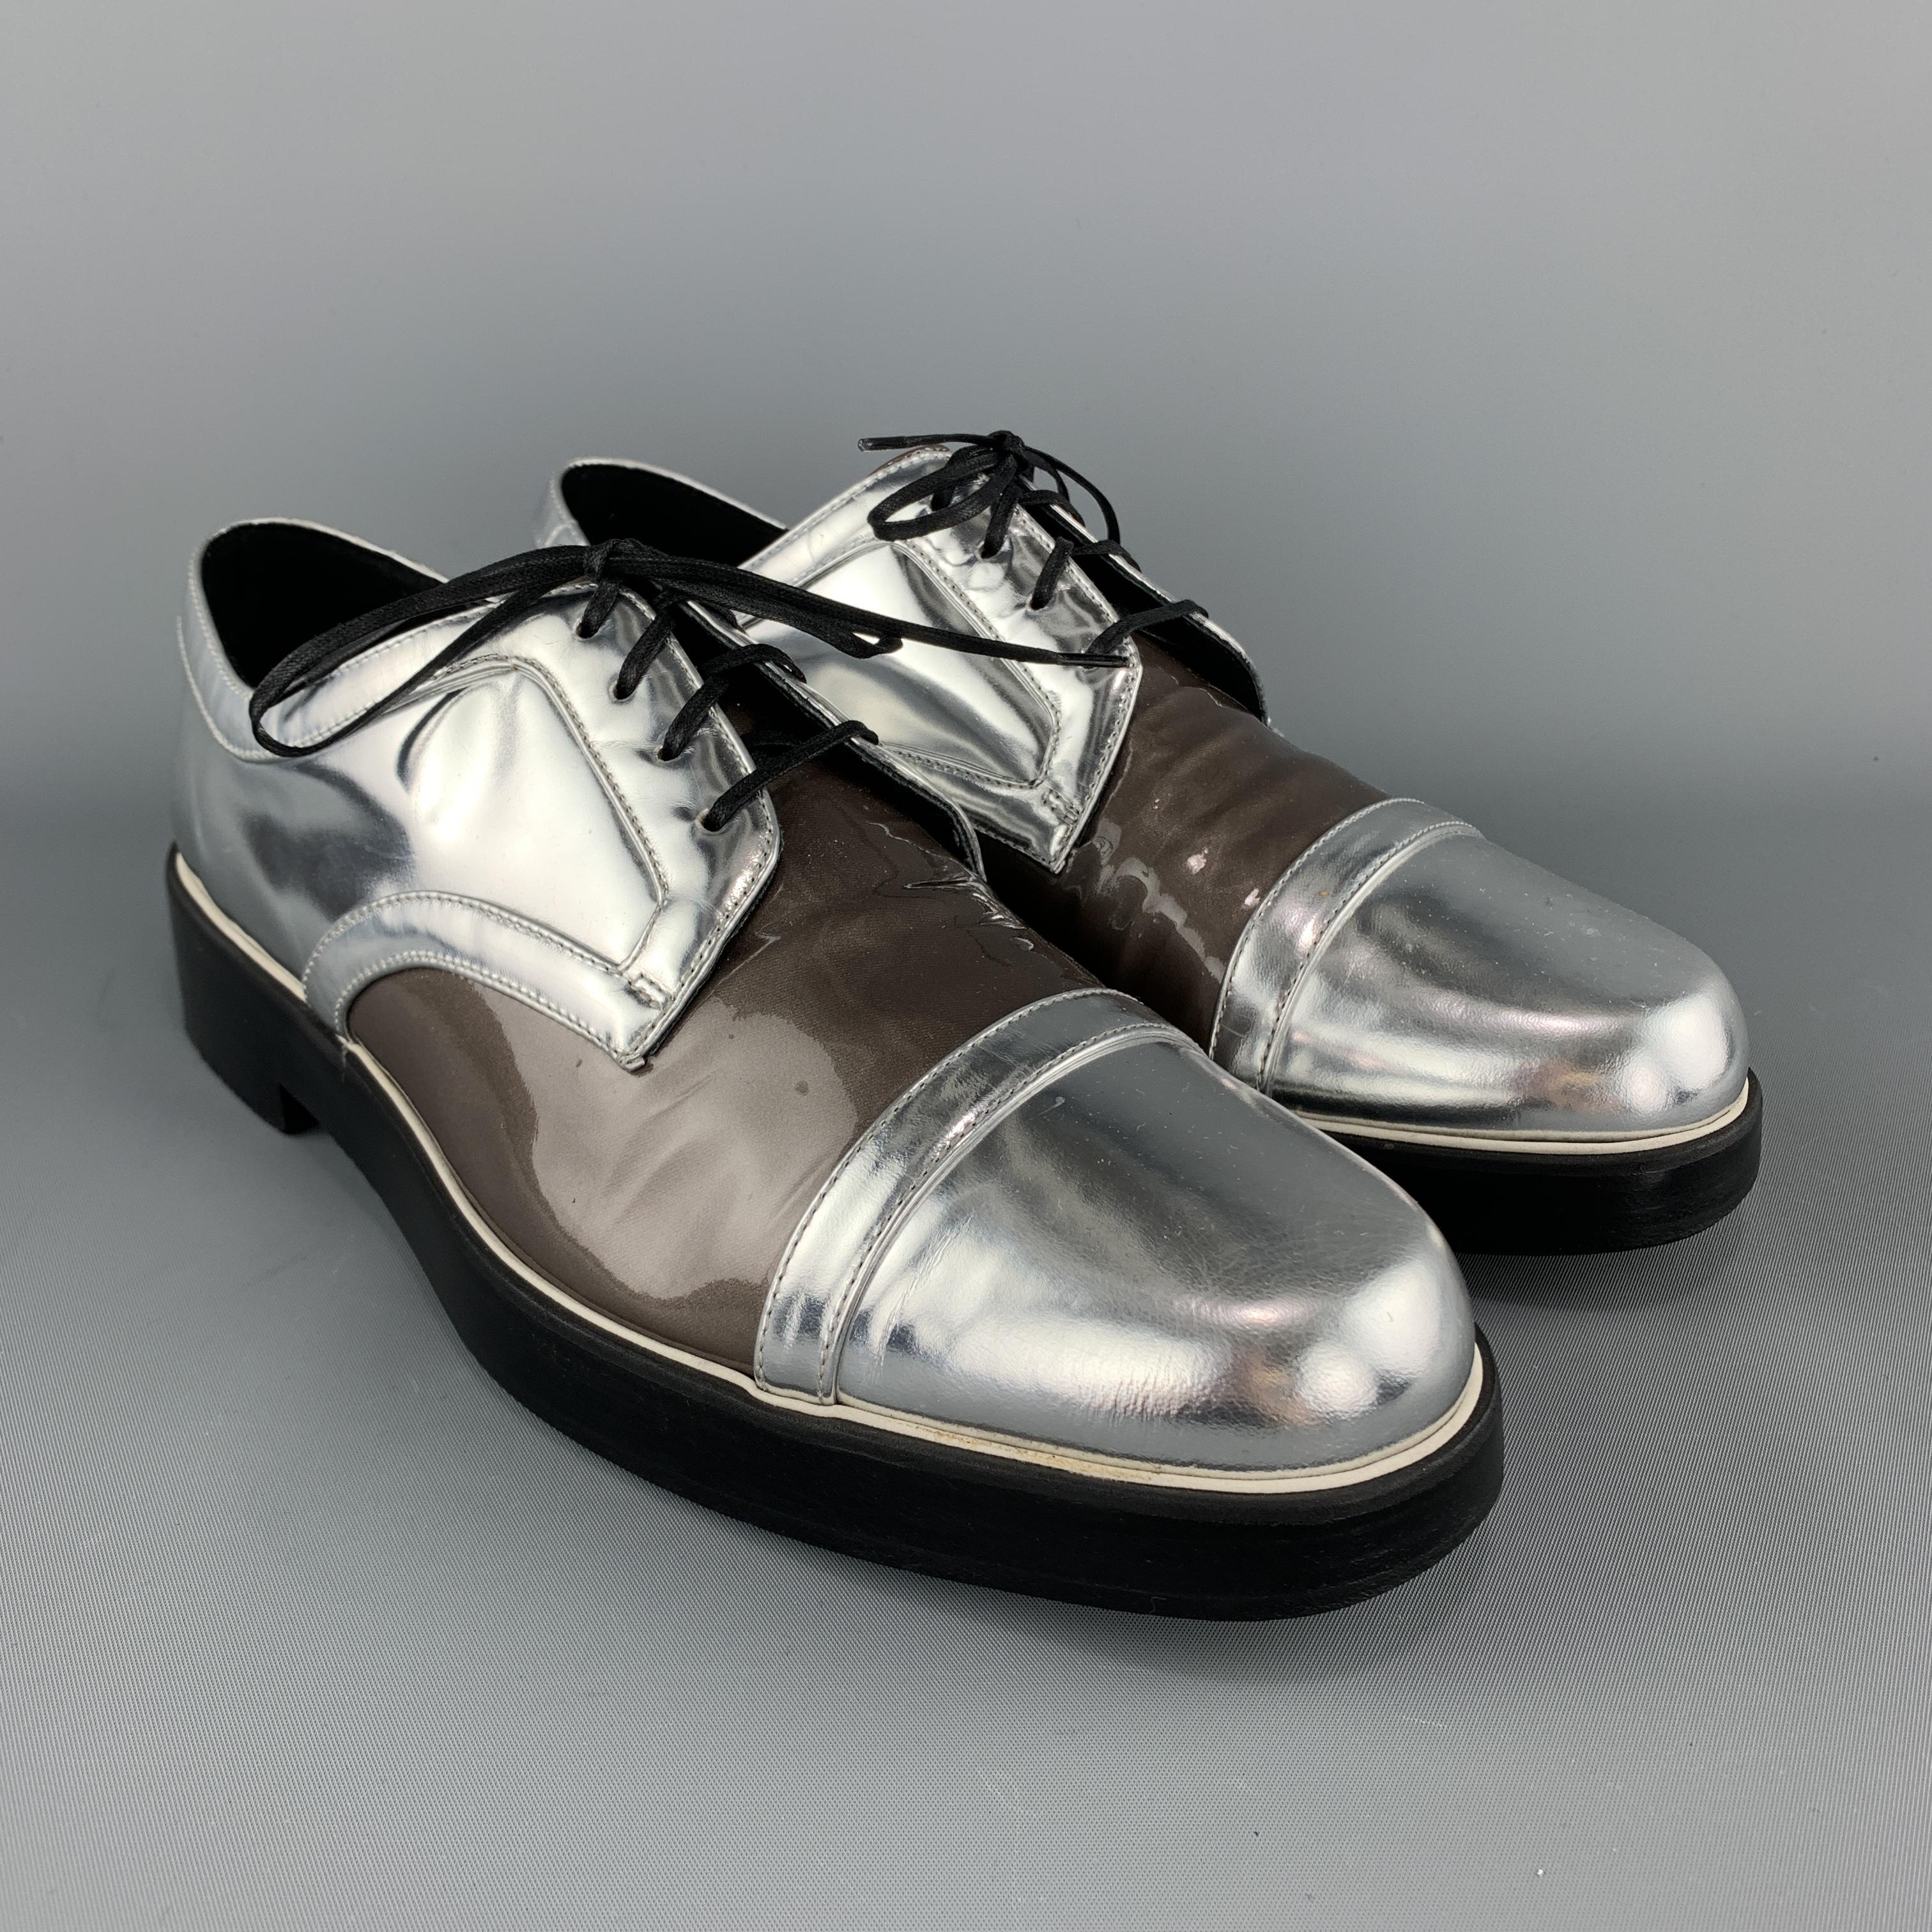 NICHOLAS KIRKWOOD derbys come in metallic silver patent leather with a pearl taupe patent leather mid panel and chunky black sole. Made in Italy.

Very Good Pre-Owned Condition.
Marked: IT 42

Outsole: 11.5 x 4 in.